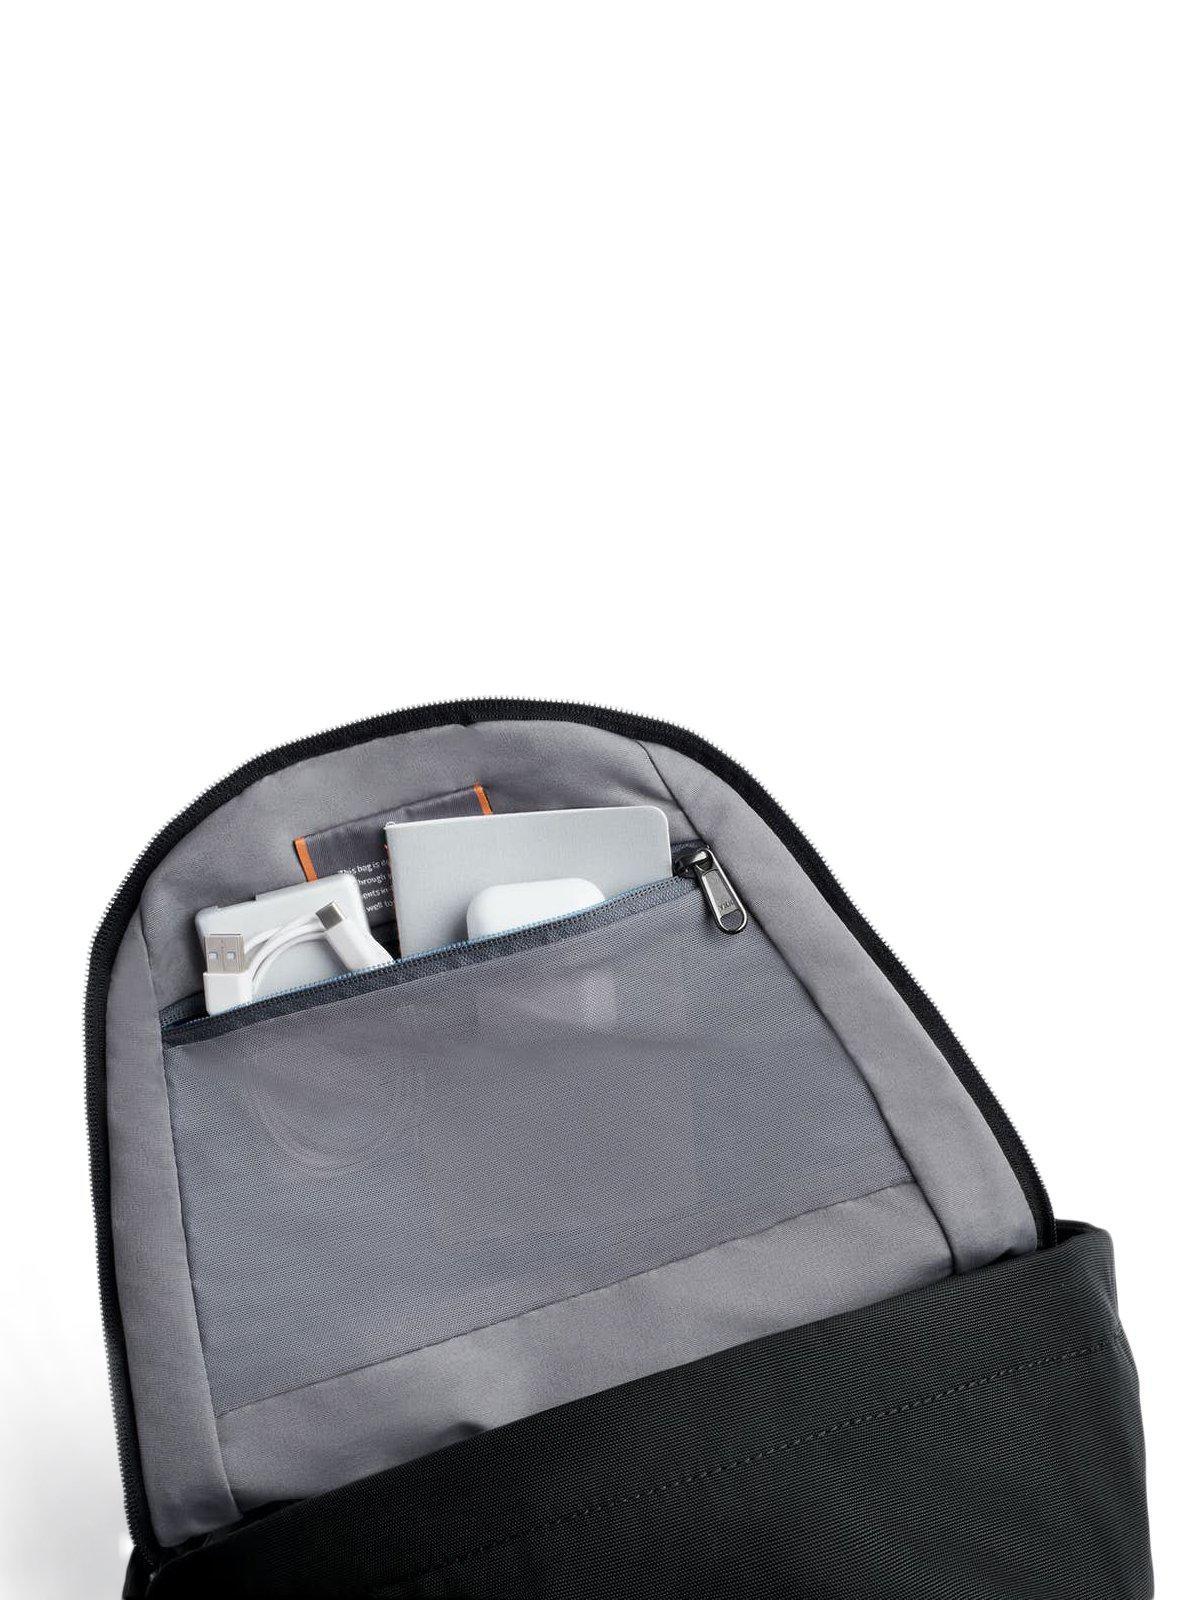 Bellroy Classic Backpack Compact Black